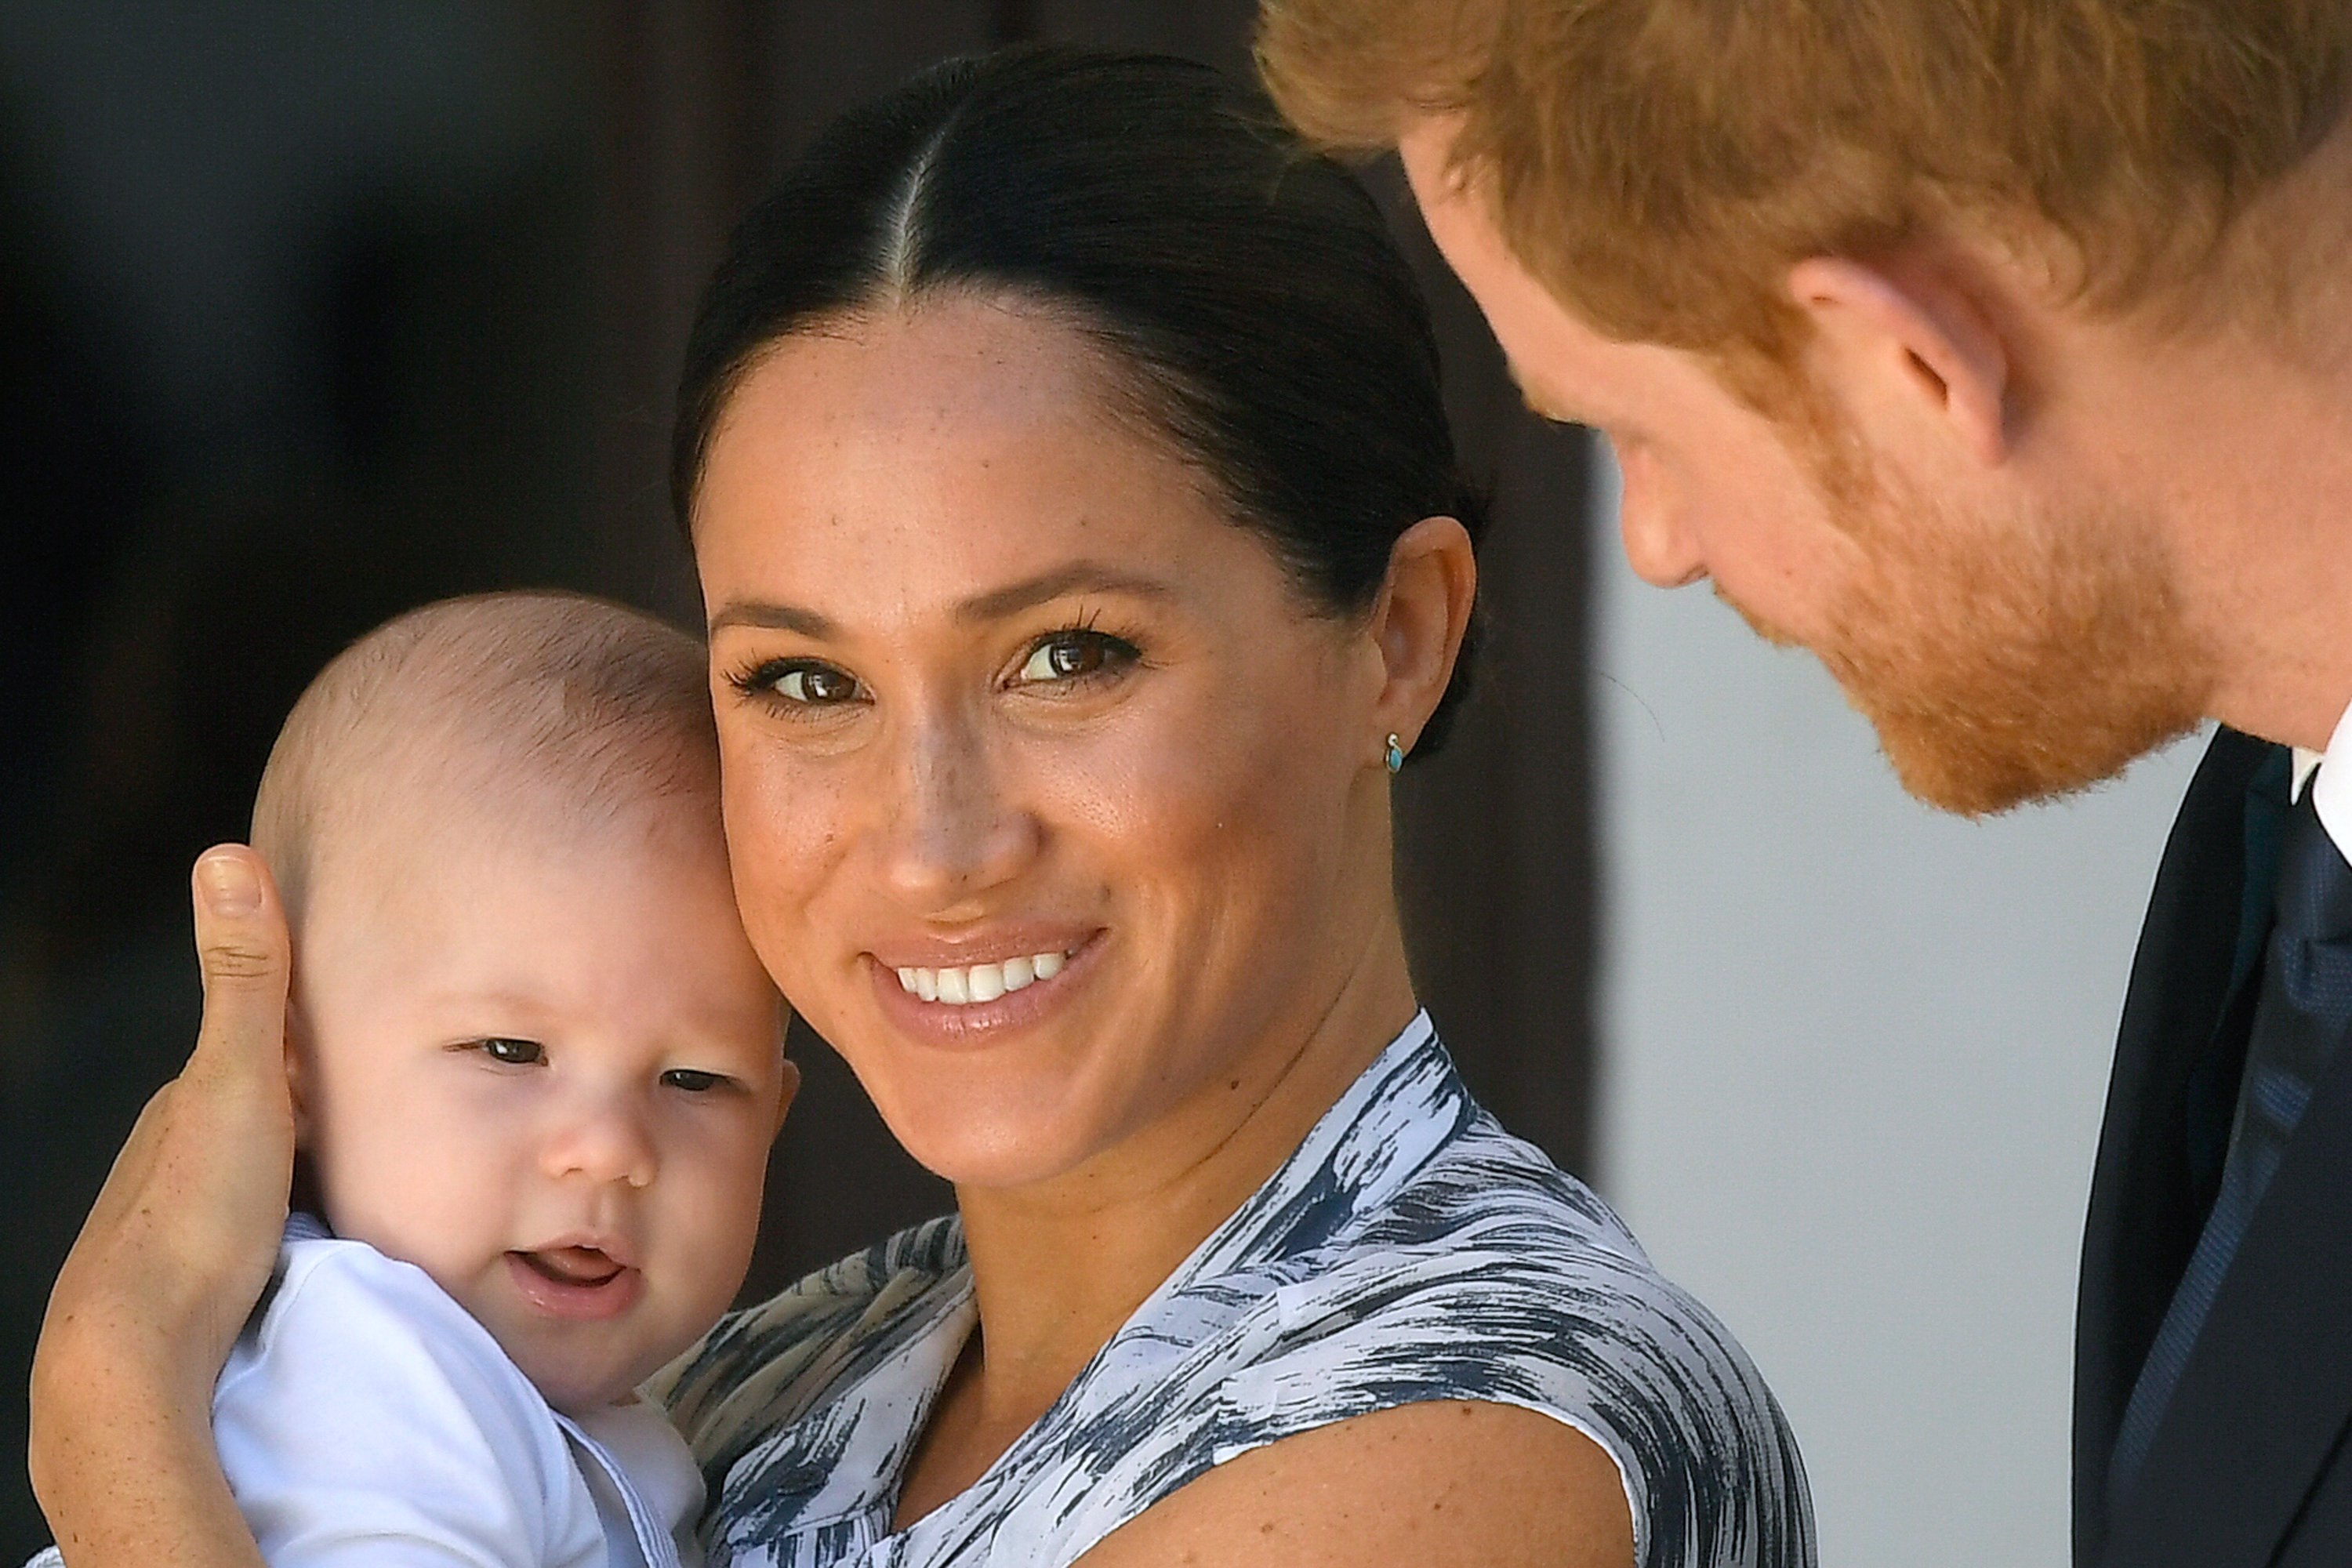 Prince Harry, Meghan Markle and their baby son Archie Mountbatten-Windsor during their royal tour of South Africa on September 25, 2019 in Cape Town, South Africa. | Source: Getty Images